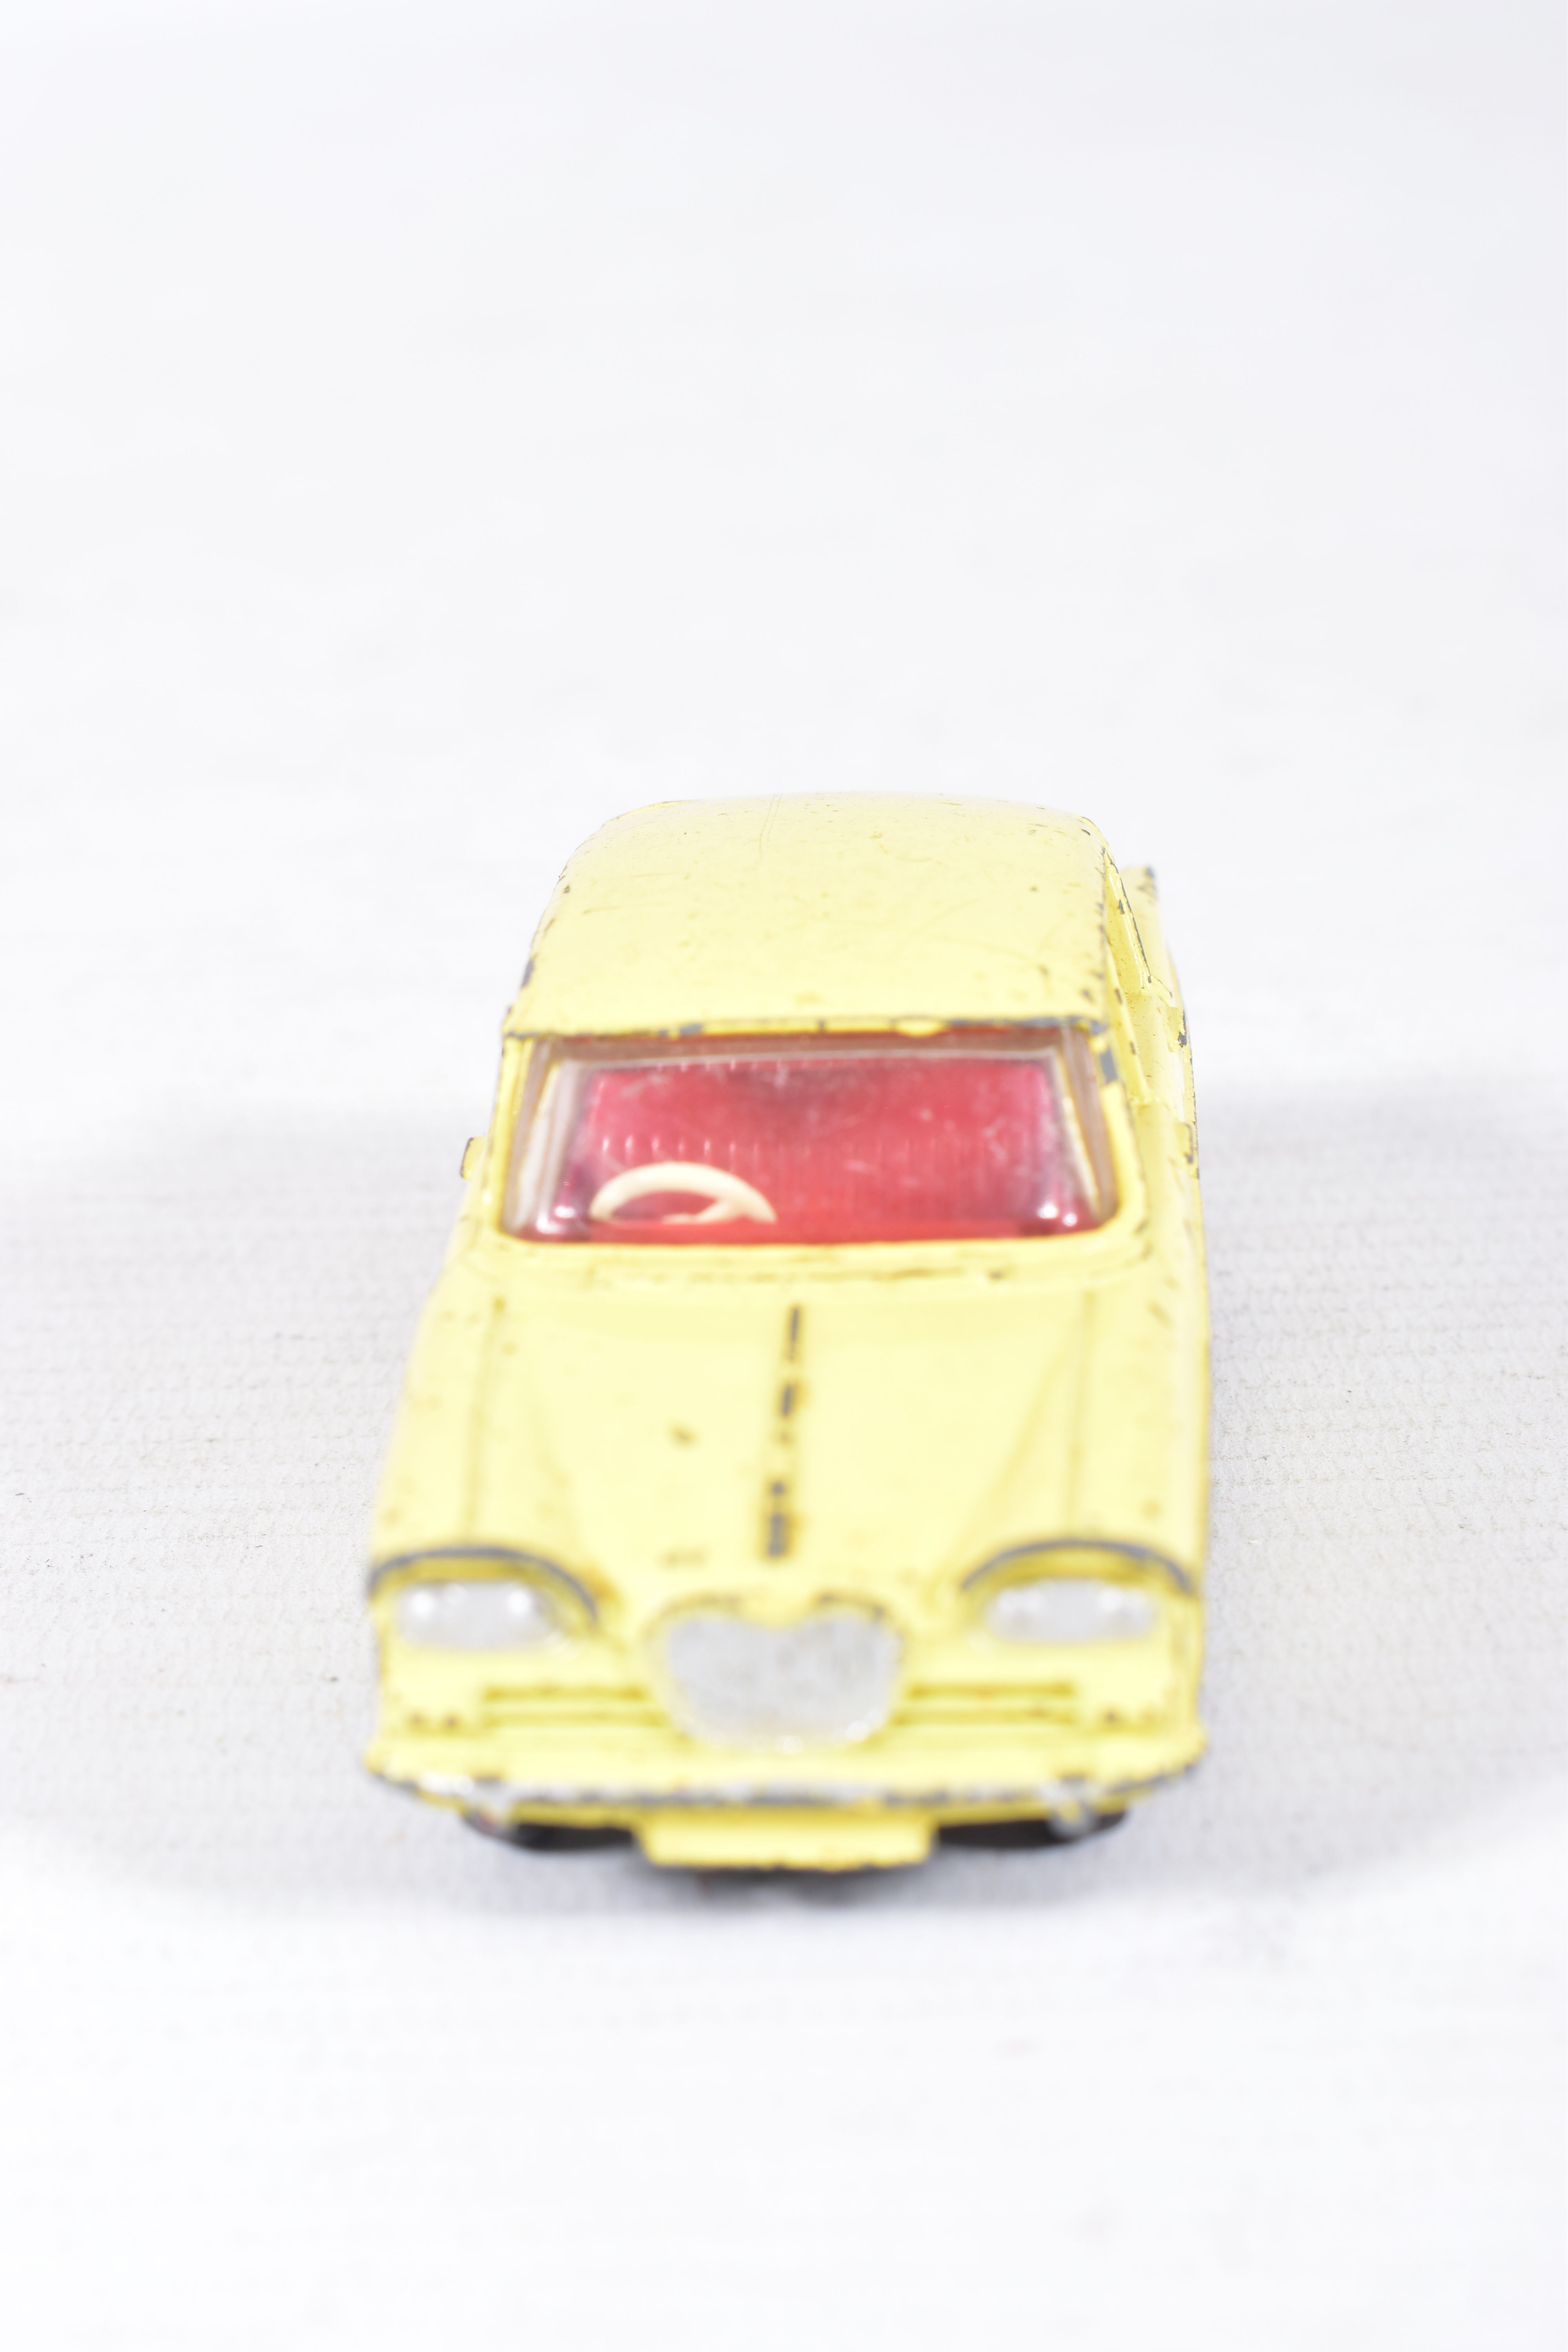 AN UNBOXED DINKY TOYS SINGER VOGUE, No.145, rarer version with yellow body, red interior, playworn - Image 2 of 4